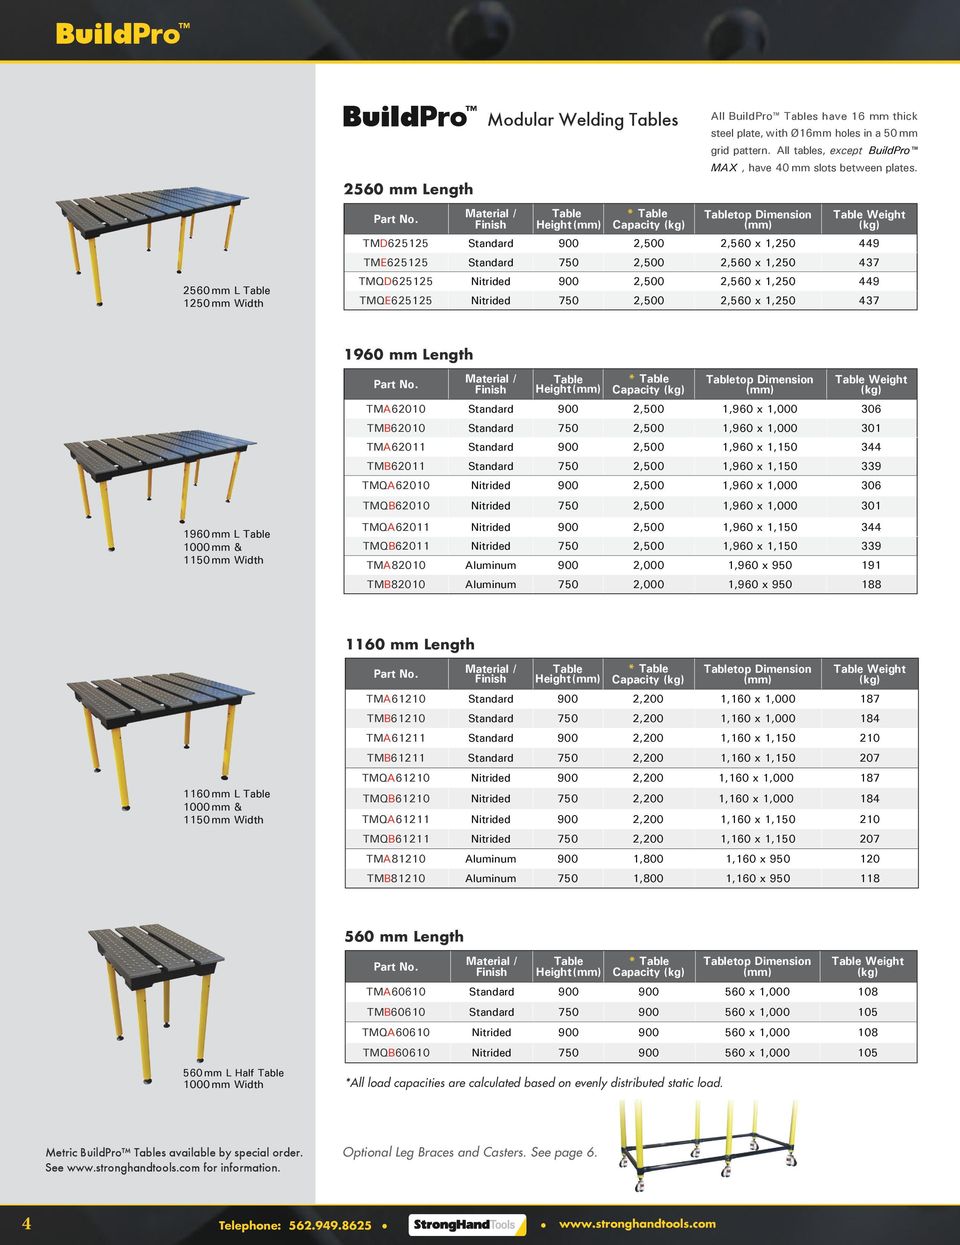 Tabletop Dimension Table TMD6515 Standard 900,500,560 x 1,50 9 TME6515 Standard 750,500,560 x 1,50 37 TMQD6515 Nitrided 900,500,560 x 1,50 9 TMQE6515 Nitrided 750,500,560 x 1,50 37 1960 mm Length